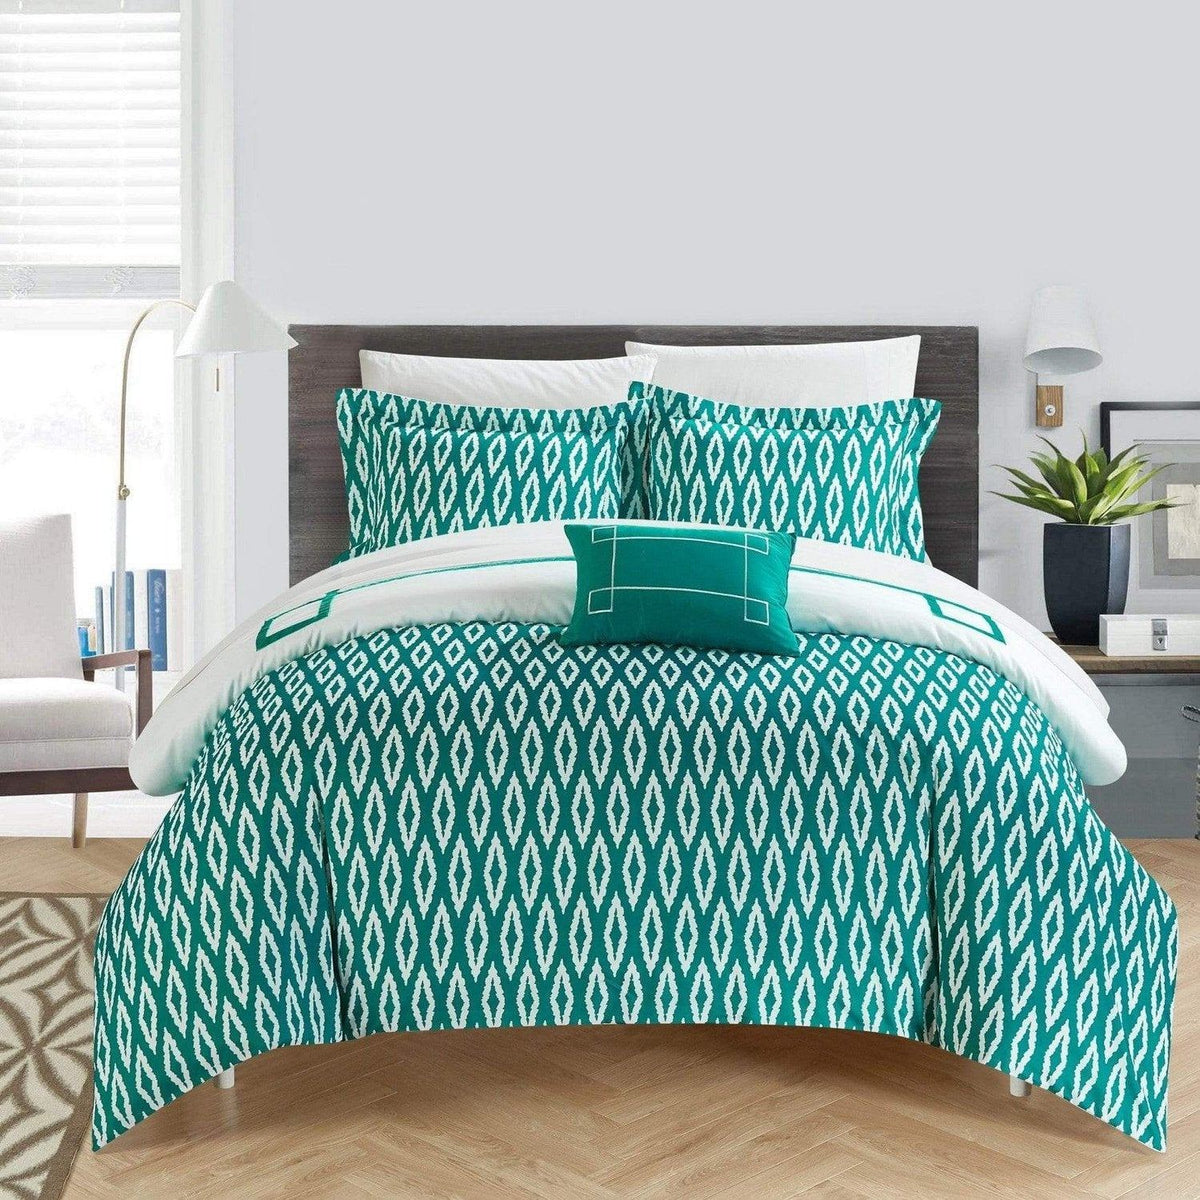 Chic Home Kendall 8 Piece Reversible Duvet Cover Set 